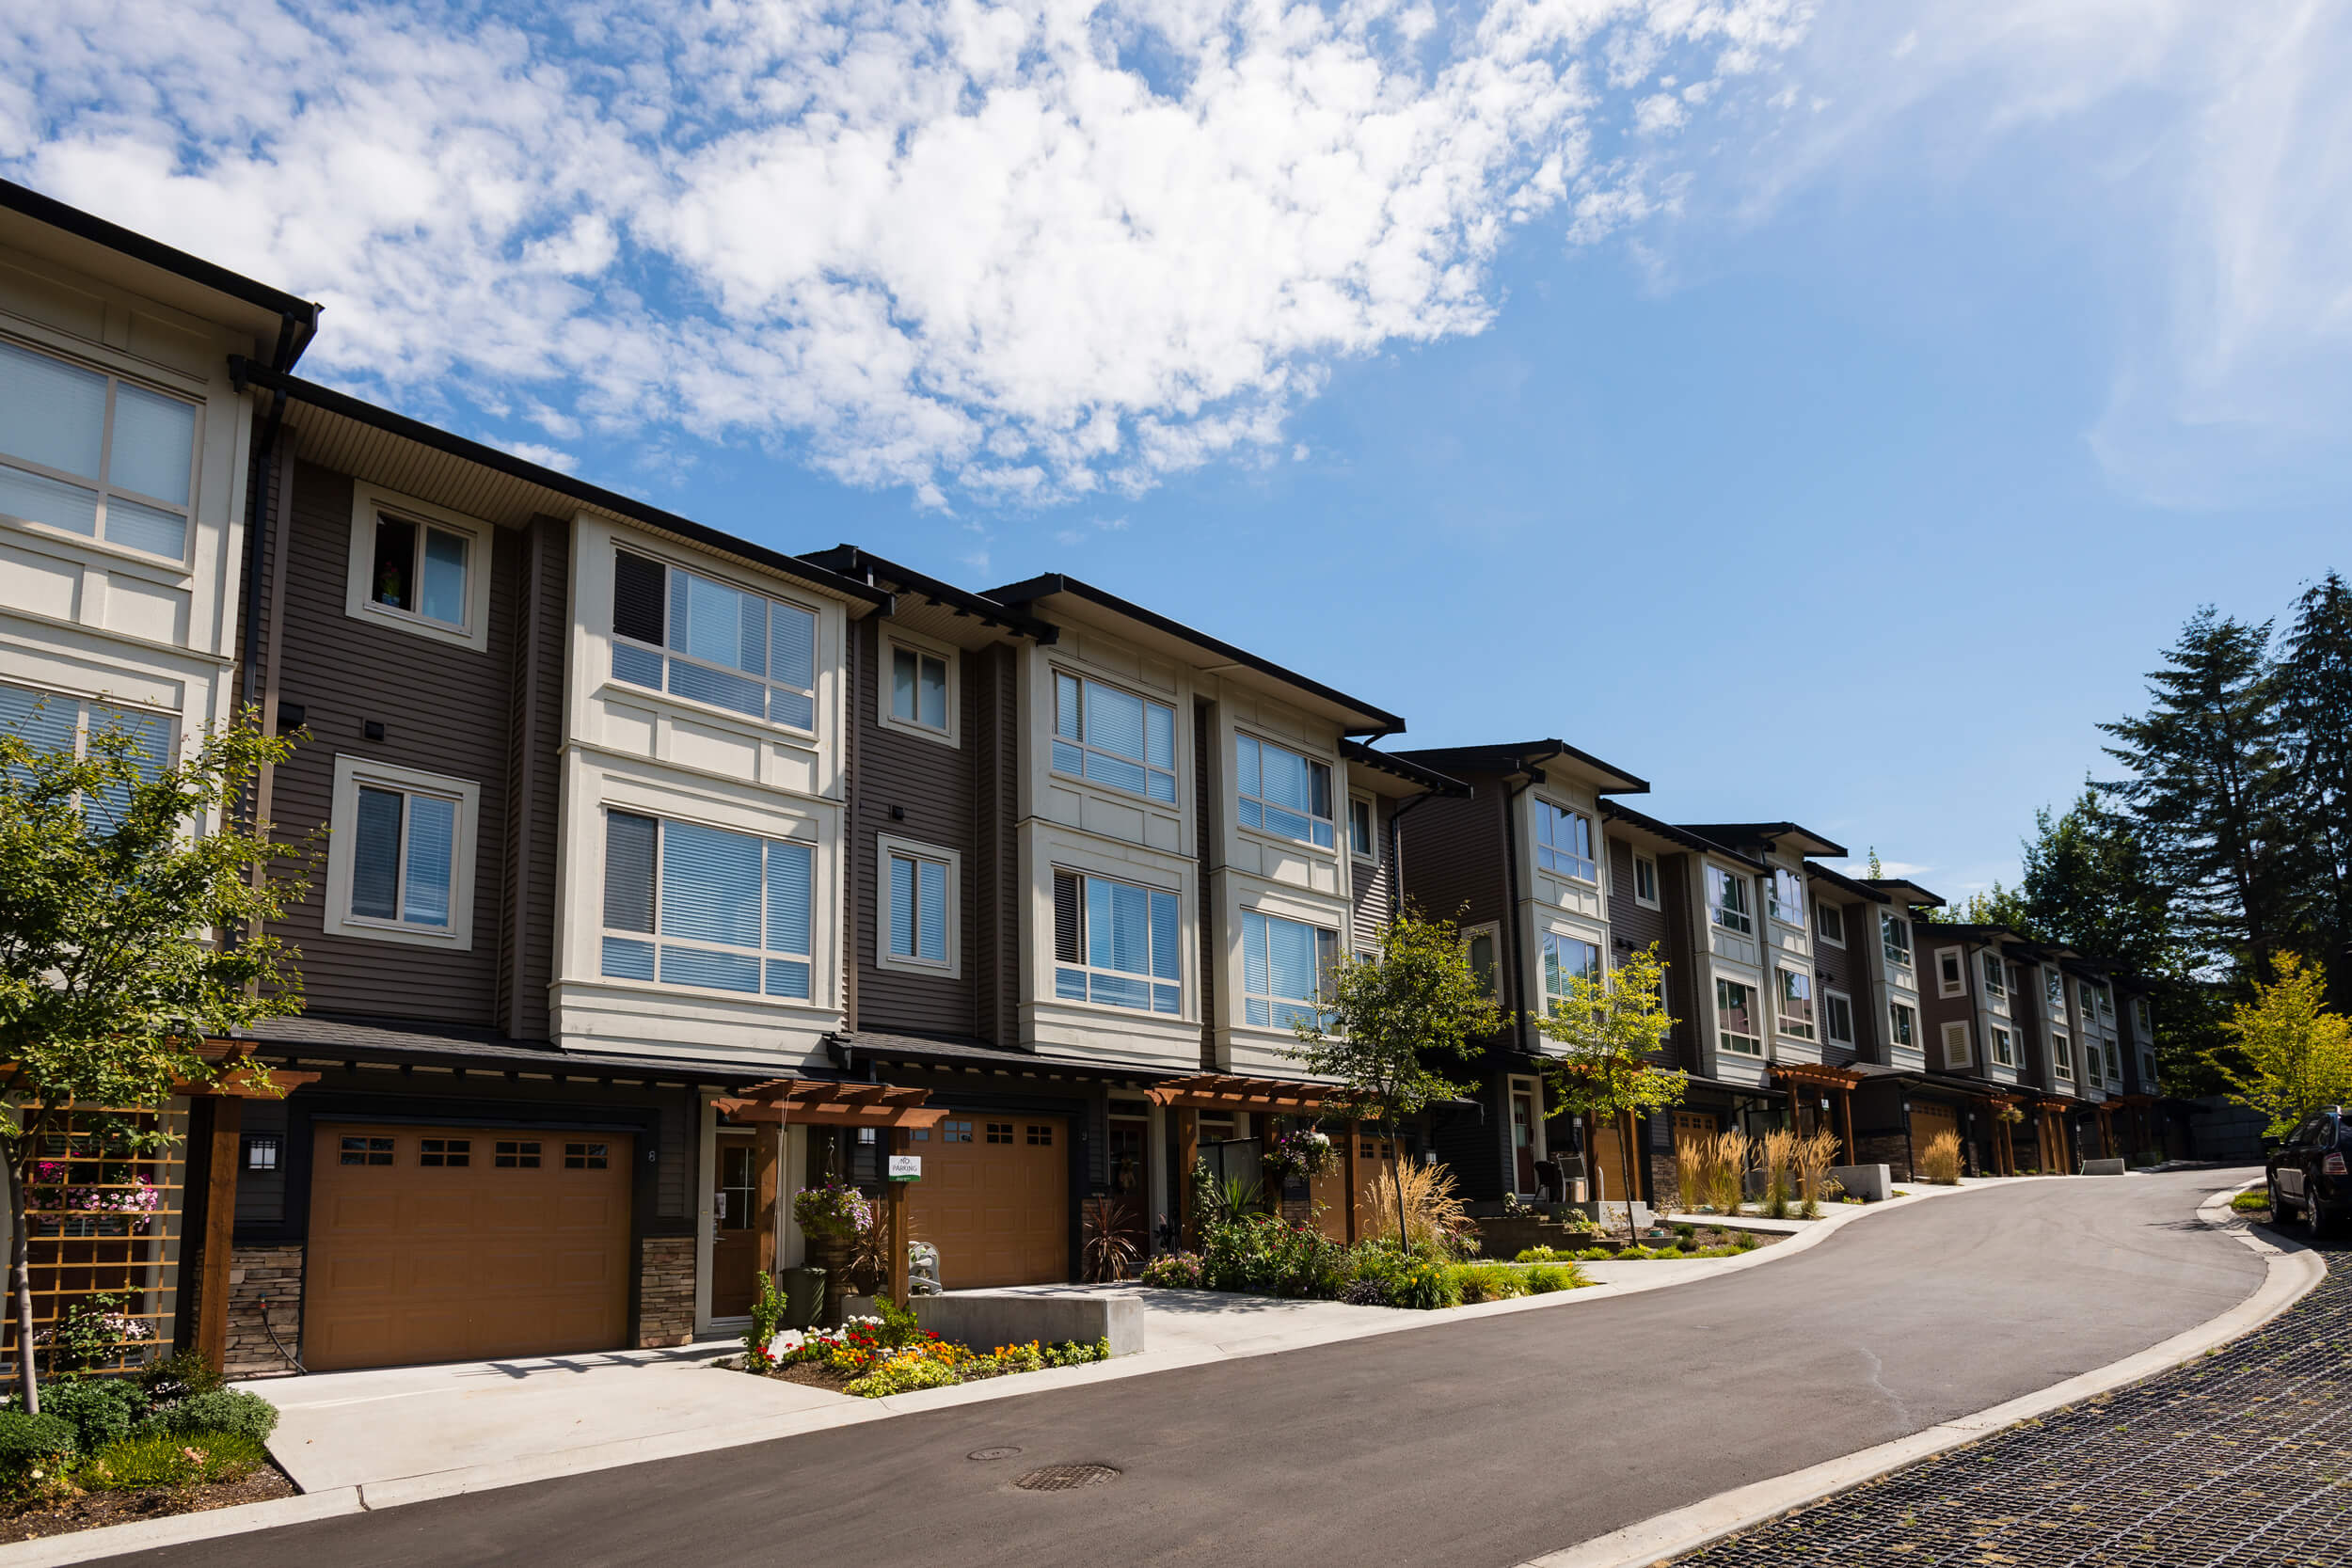 The “Spencer Brook” development is a residential 40 unit townhouse project located at Maple Ridge. Design by Group 161 | Atelier Pacific Architecture.